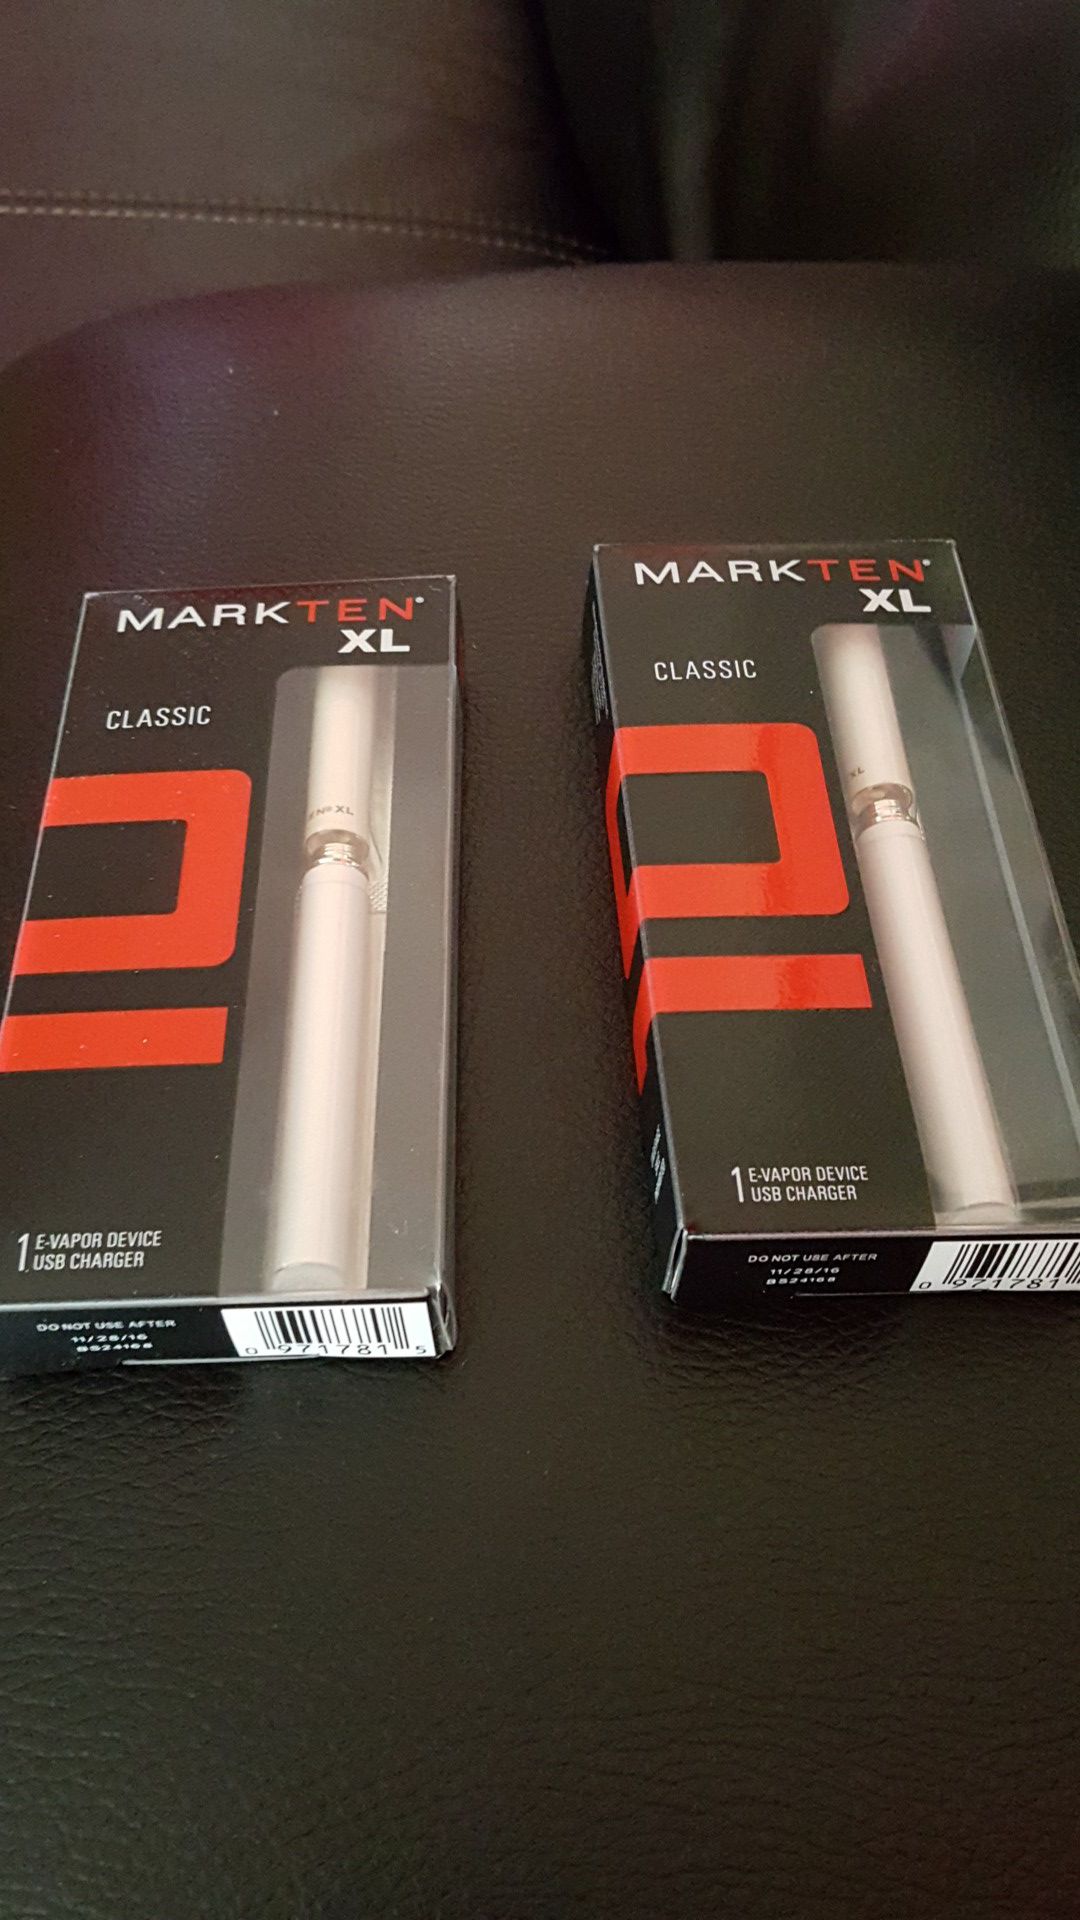 MarkTen Xl classic Rechargeable vapor device with usb charger in the box  new 2 for $20 for Sale in Las Vegas, NV - OfferUp